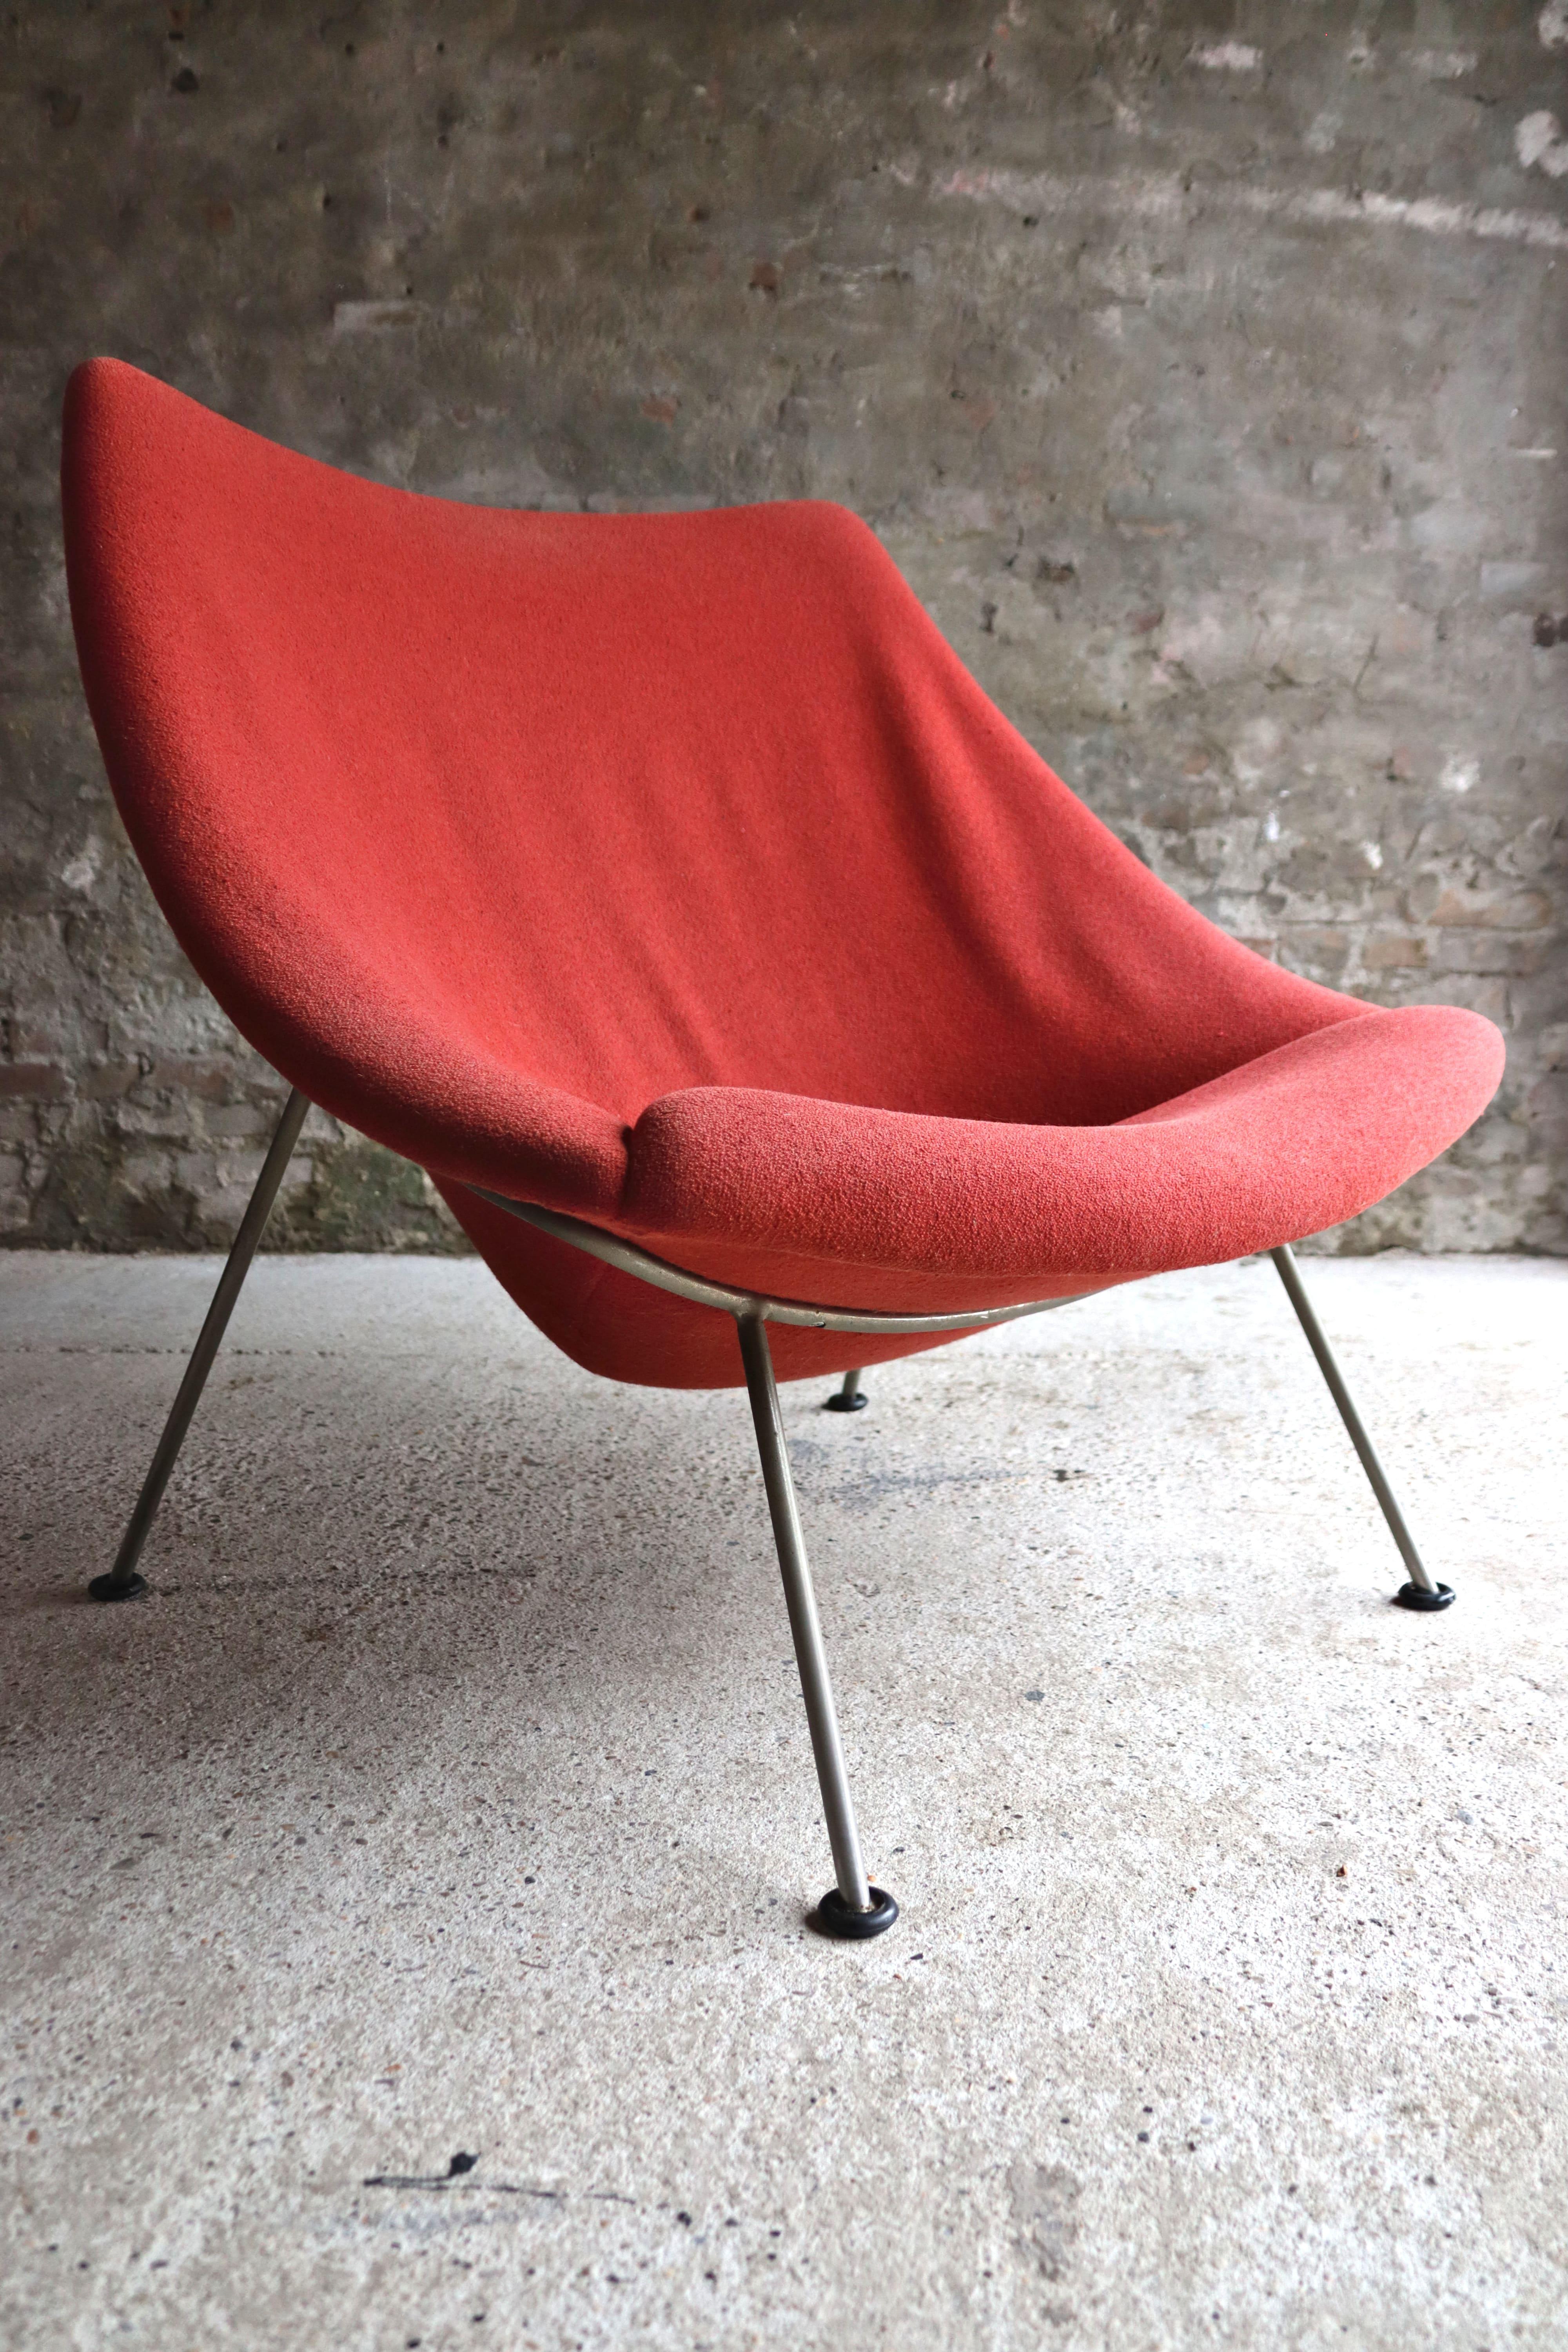 This is the Artifort Oyster F157 designed by Pierre Paulin for Artifort in the 1960s. Artifort started making this design classic in 1959. This reupholstered armchair has a wonderful seating comfort. The Artifort Oyster is available in two sizes.